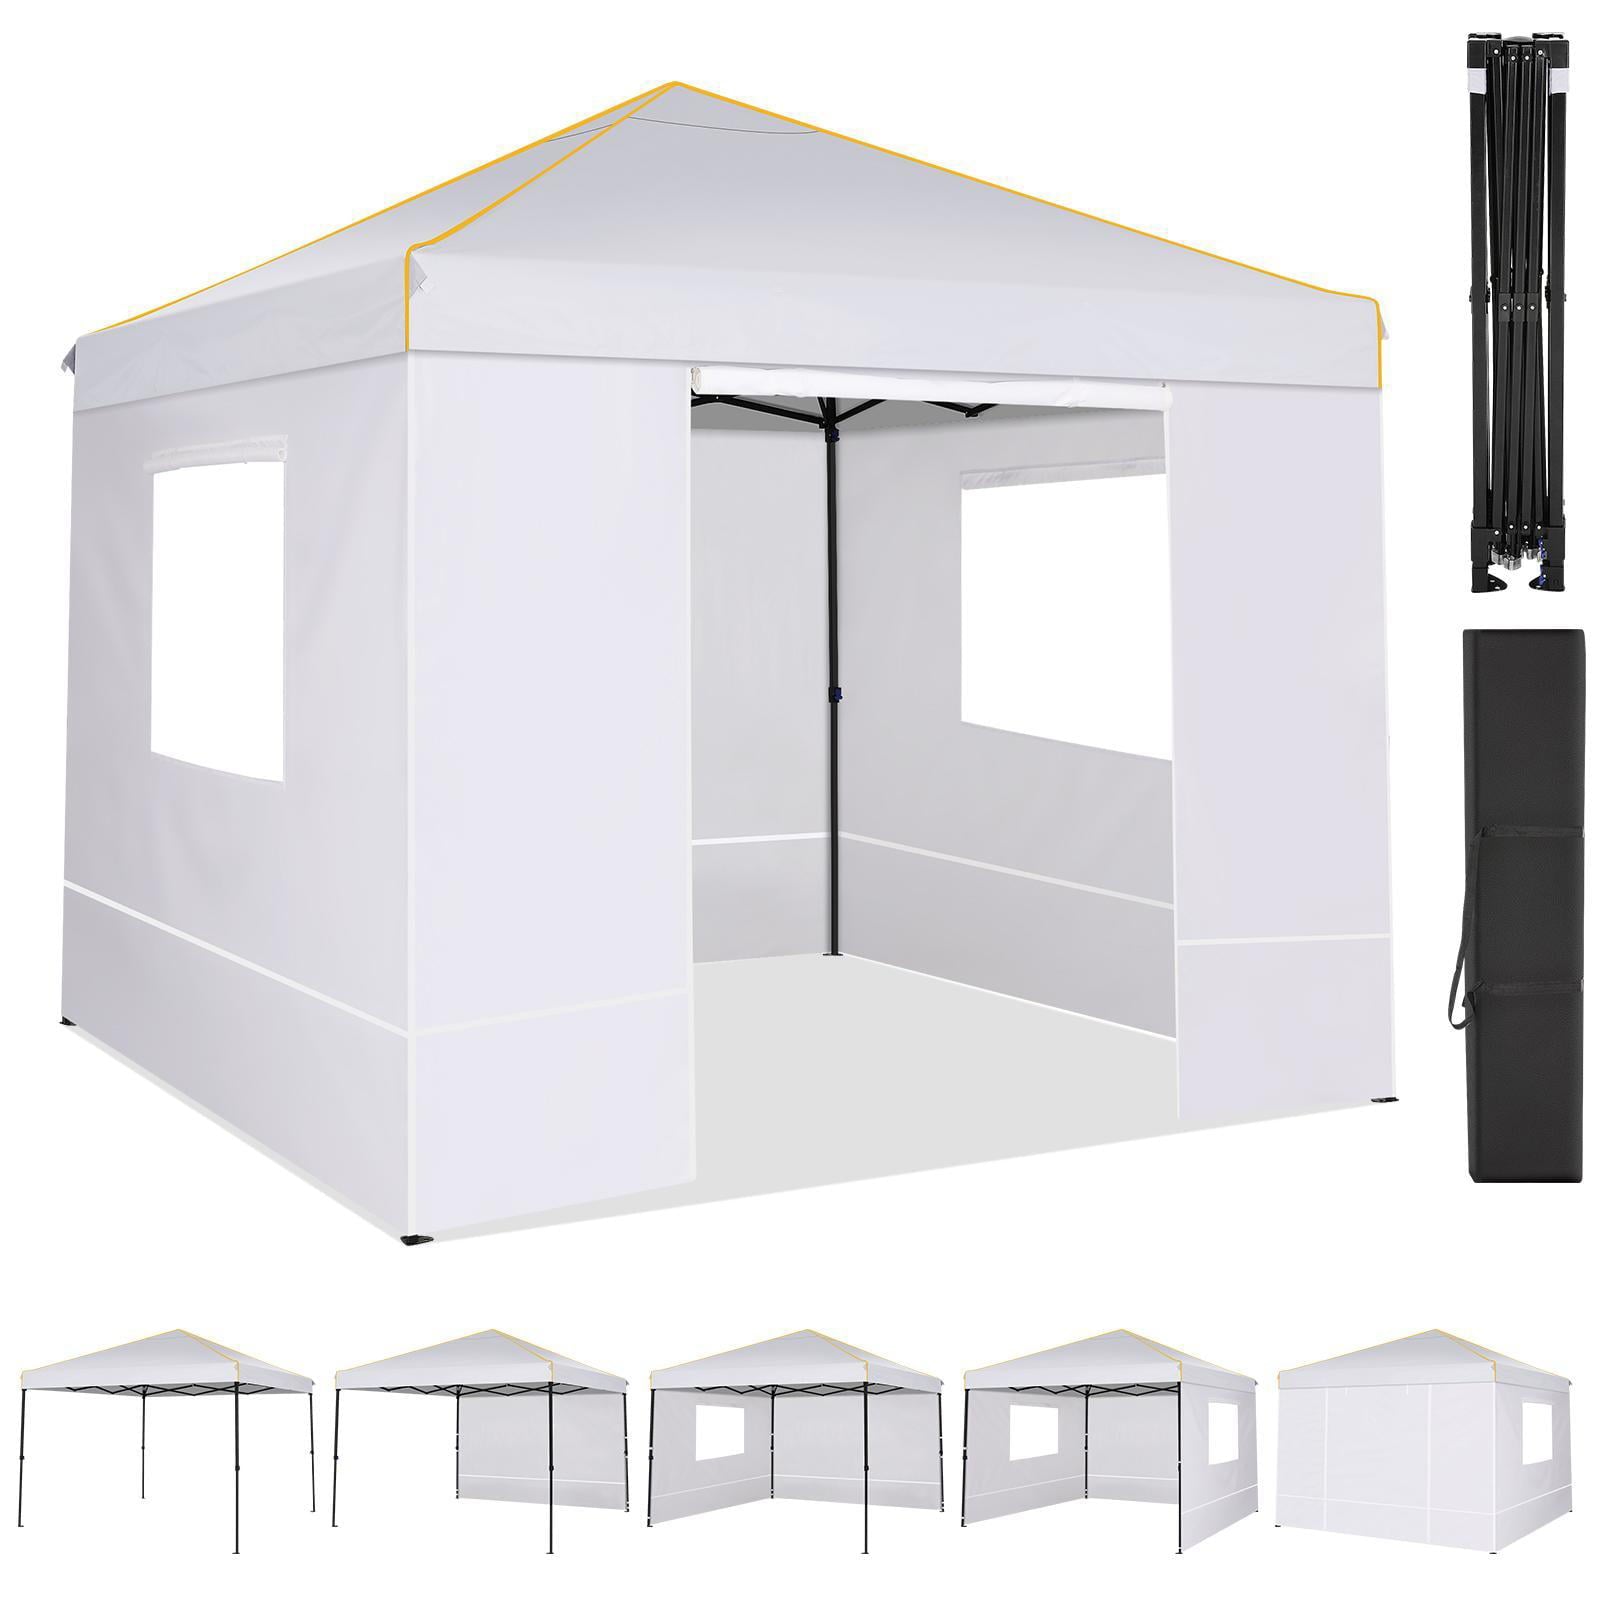 Likein 10x10 Pop Up Canopy Tent with 4 Removable Sidewalls, Waterproof Commercial Instant Gazebo Tent Outdoor Canopy Tents for Party/Exhibition/Picnic with Carry Bag, 4 Stakes and Ropes (Gray)